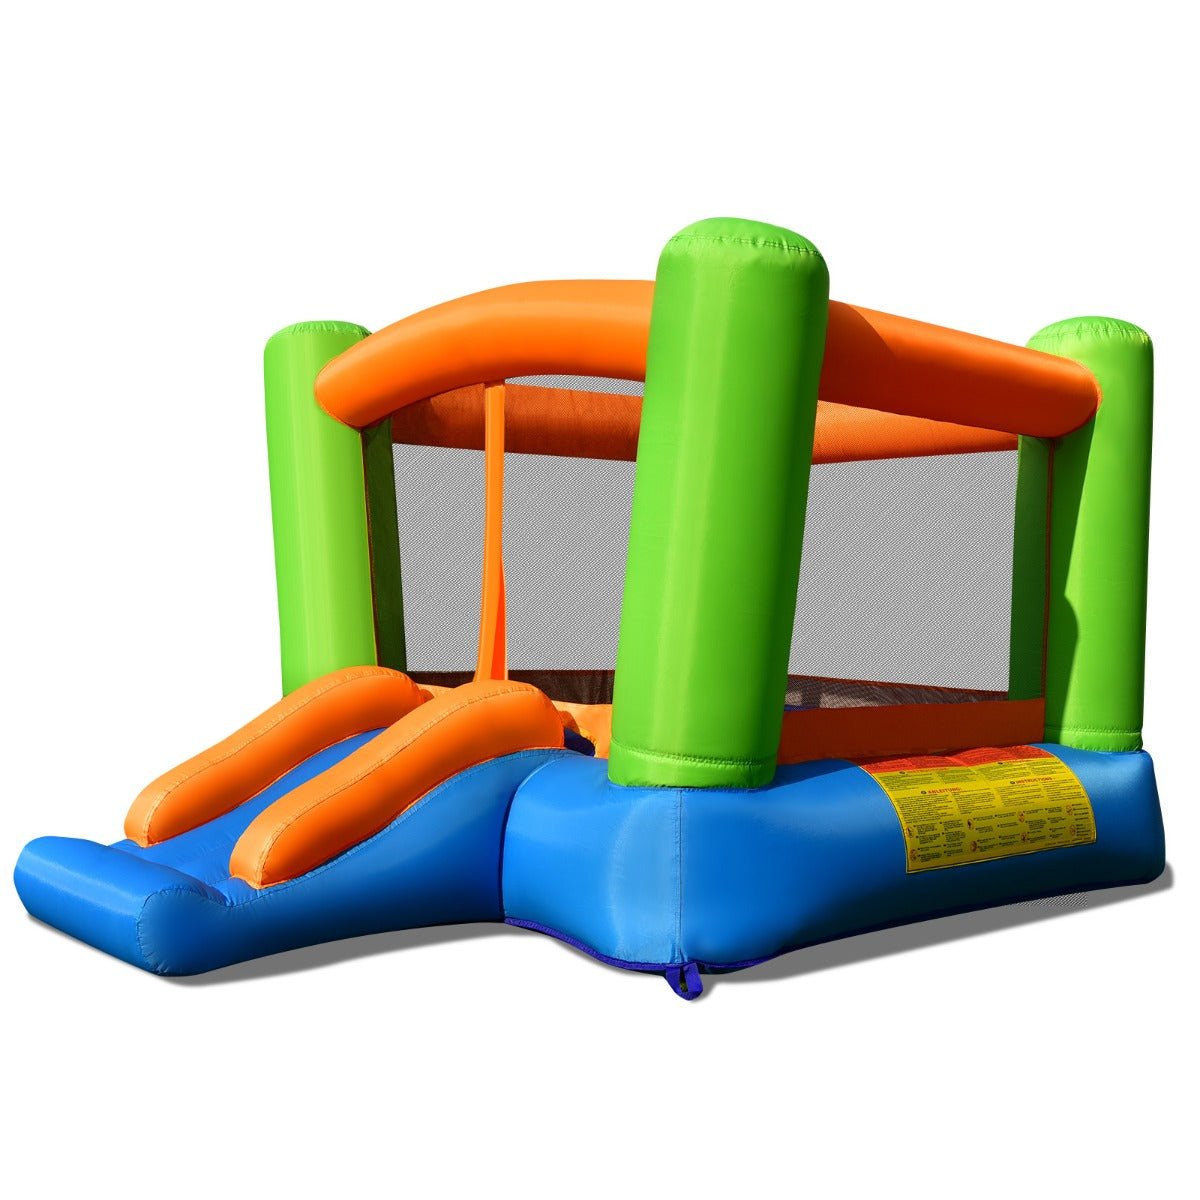 Inflatable Bounce House - Where Fun Knows No Bounds